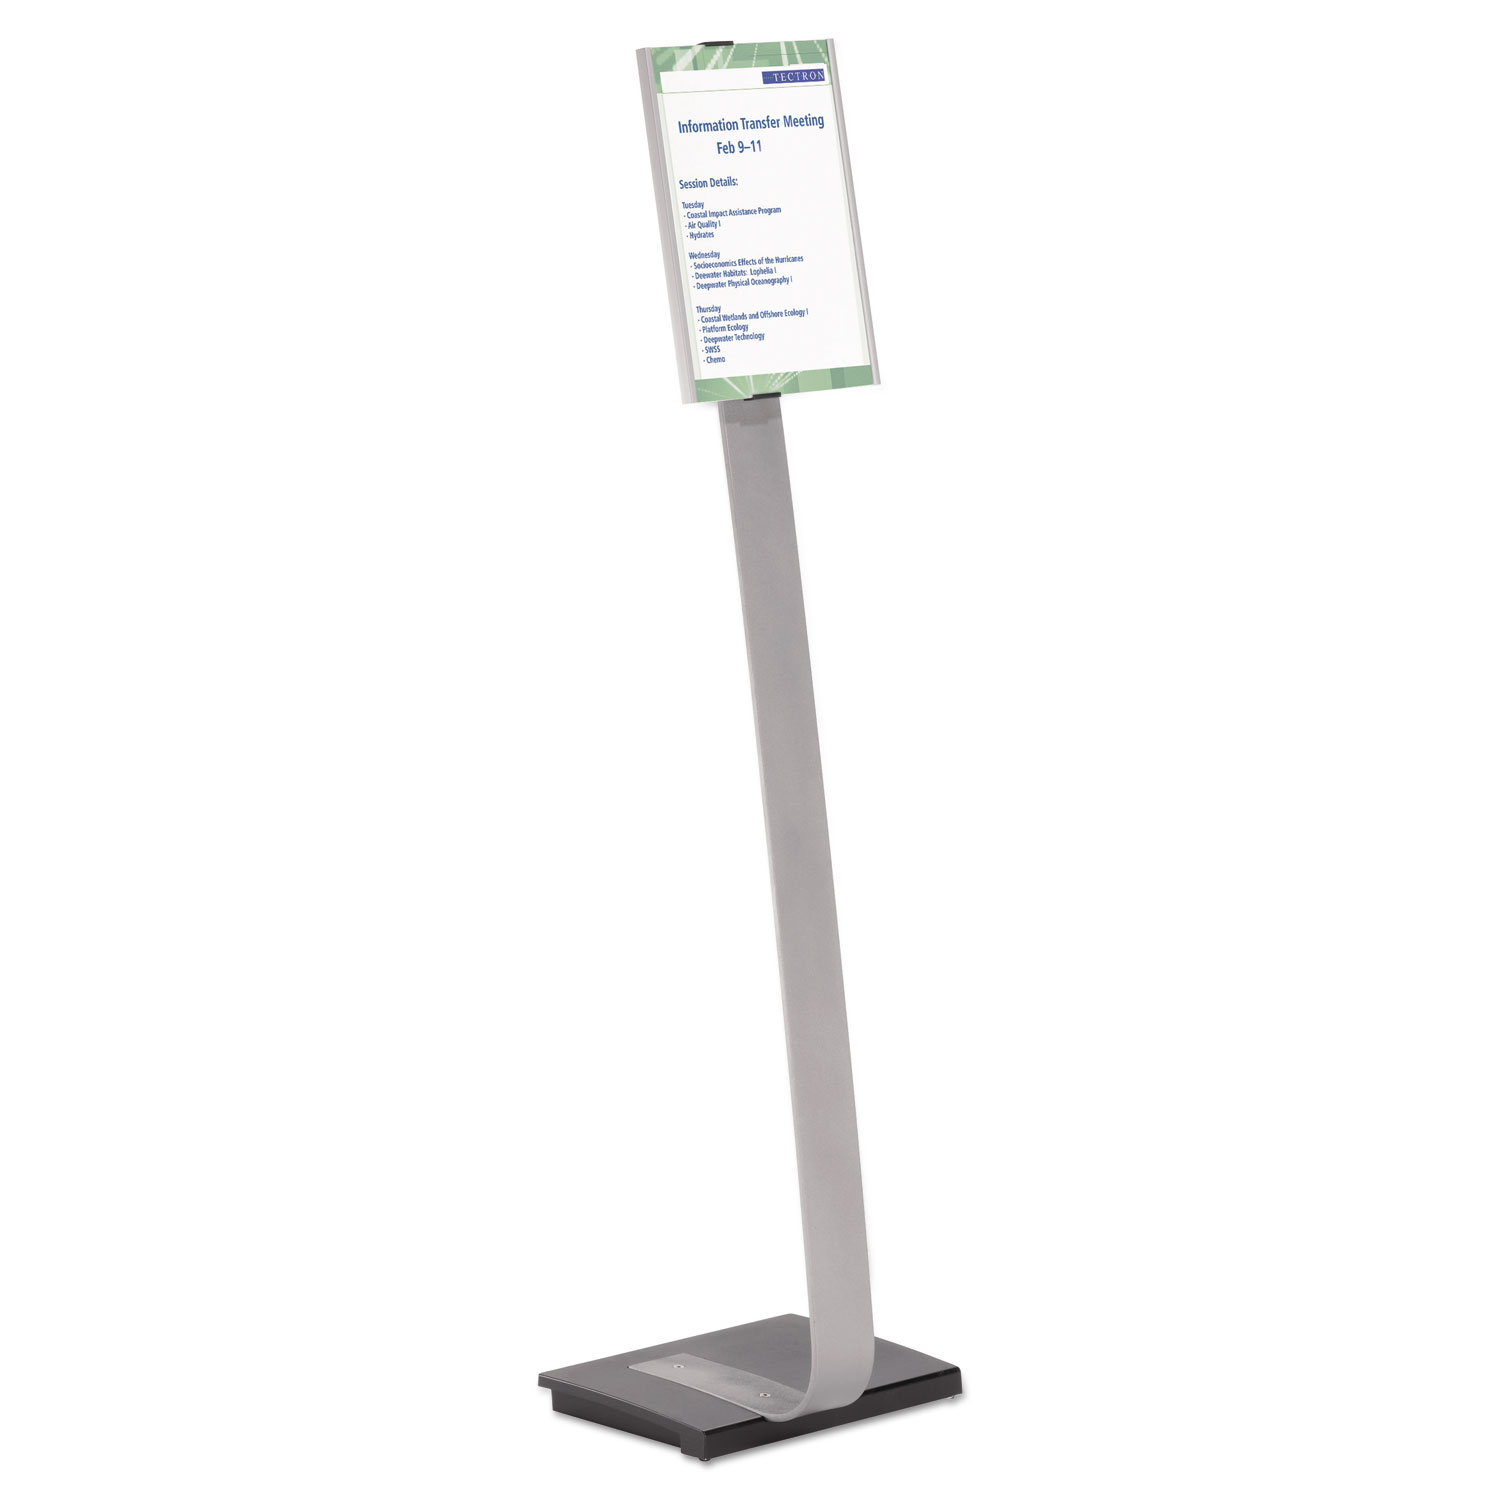  Durable 481423 Info Sign Duo Floor Stand, Letter-Size Inserts, 15 x 46 1/2, Clear (DBL481423) 